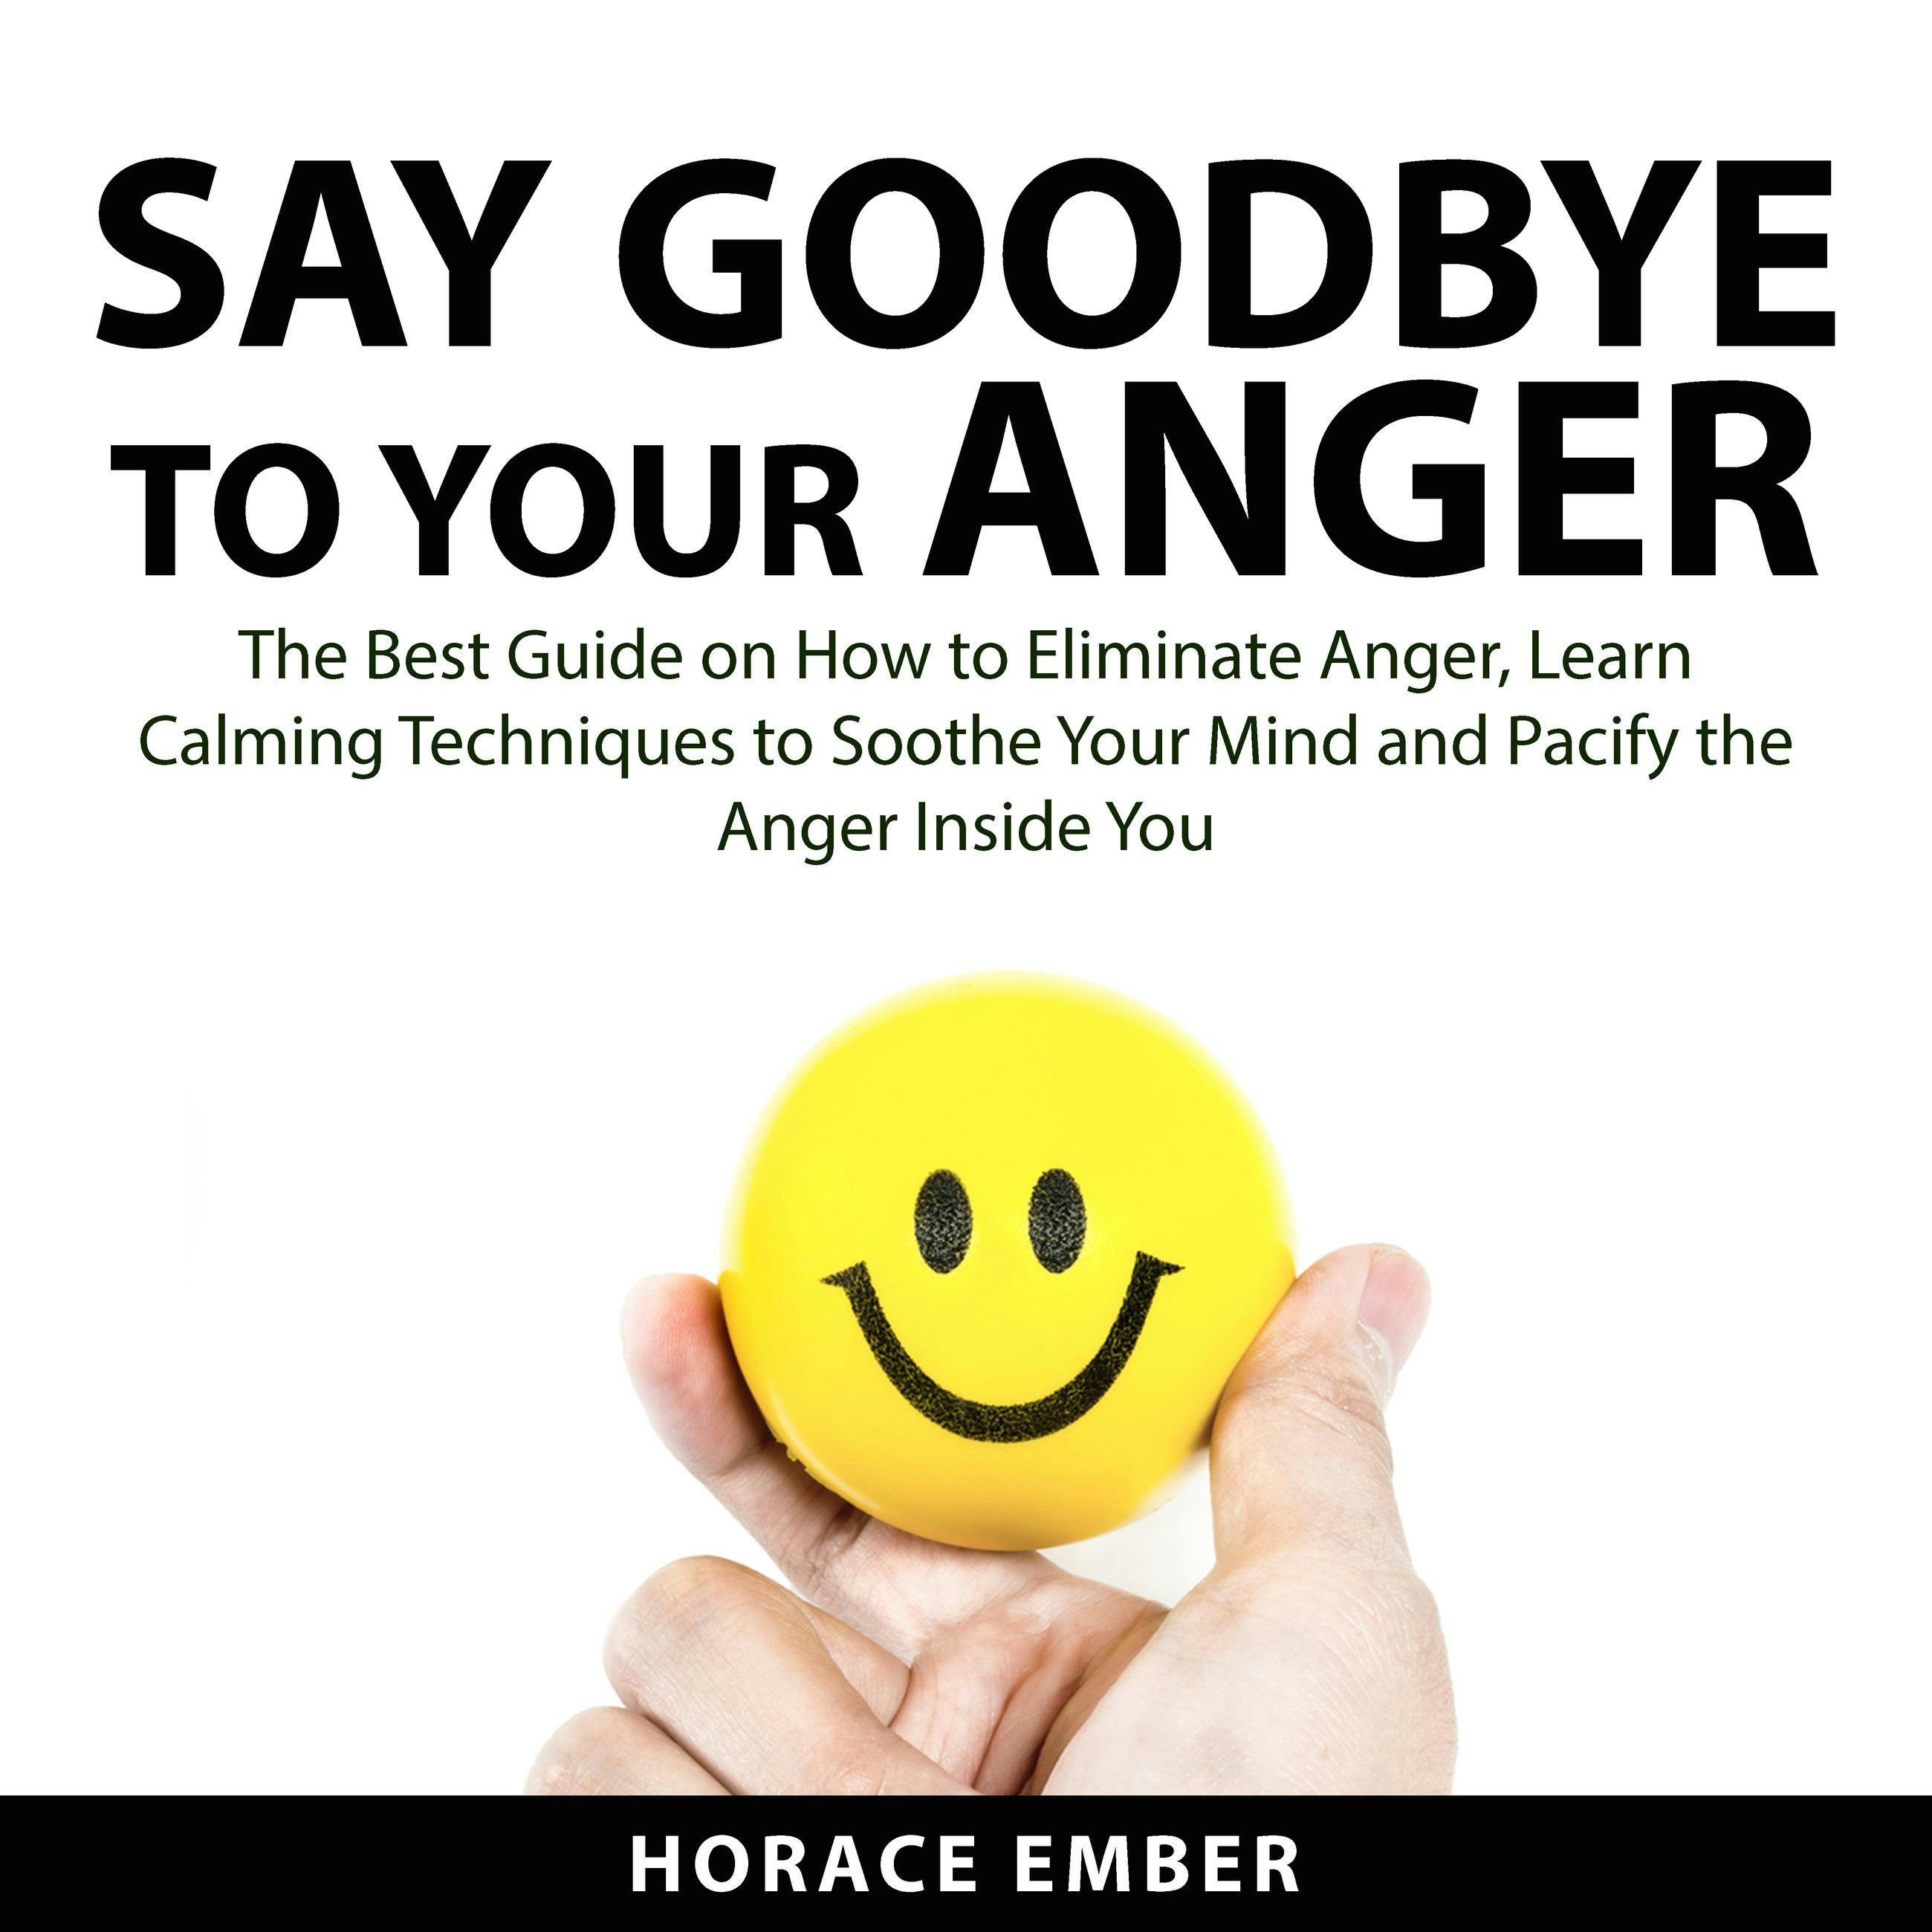 Say Goodbye to Your Anger: The Best Guide on How to Eliminate Anger, Learn Calming Techniques to Soothe Your Mind and Pacify the Anger Inside You - undefined